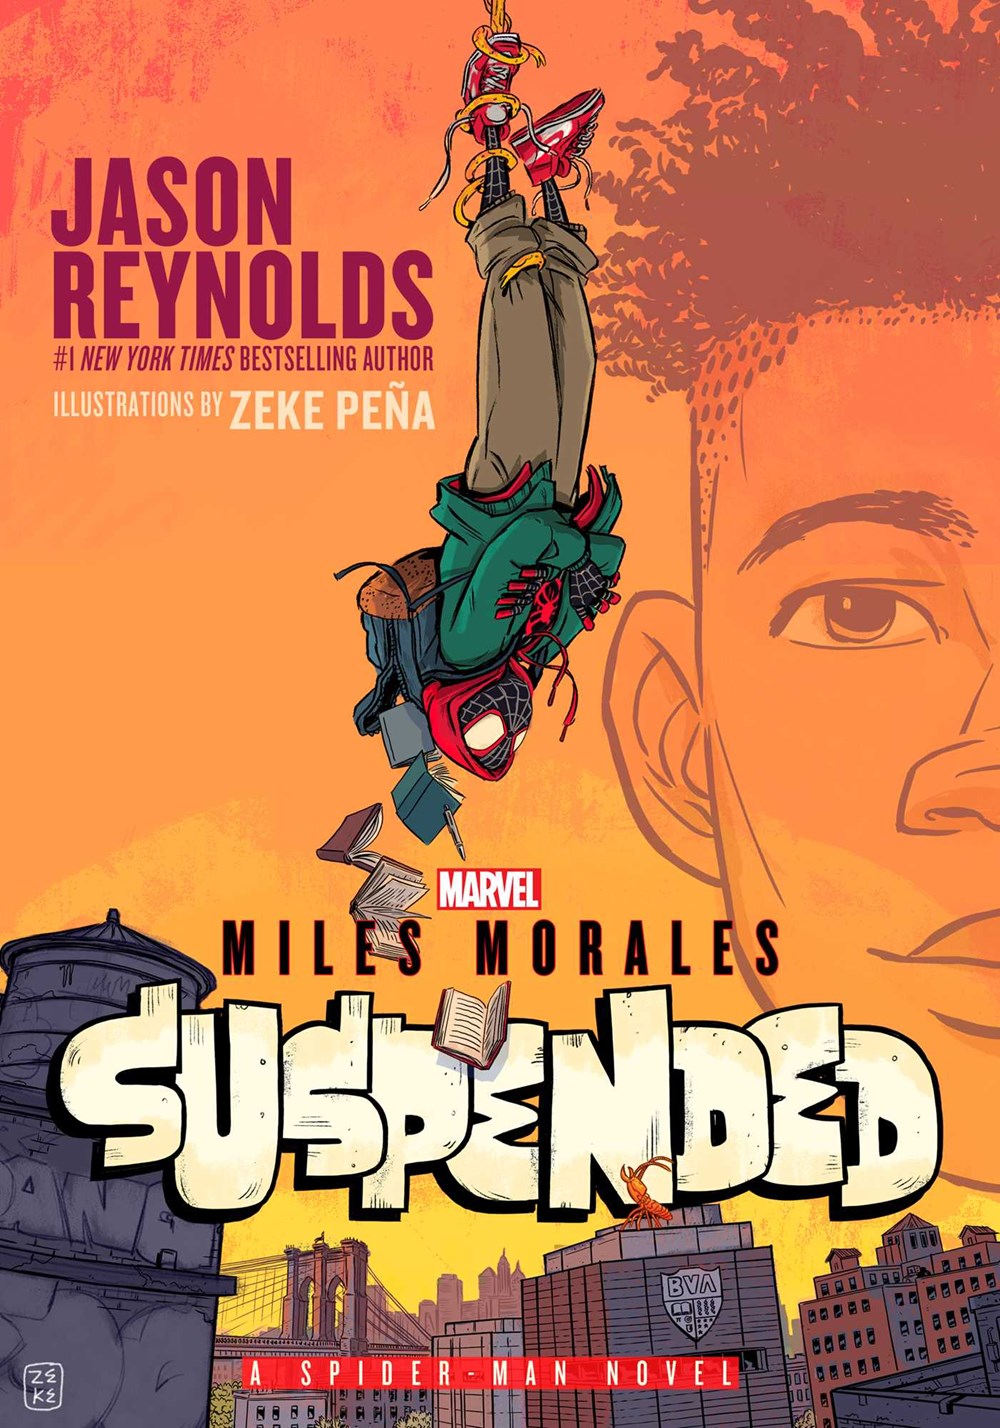 Miles Morales: Suspended by Jason Reynolds (Hardcover)